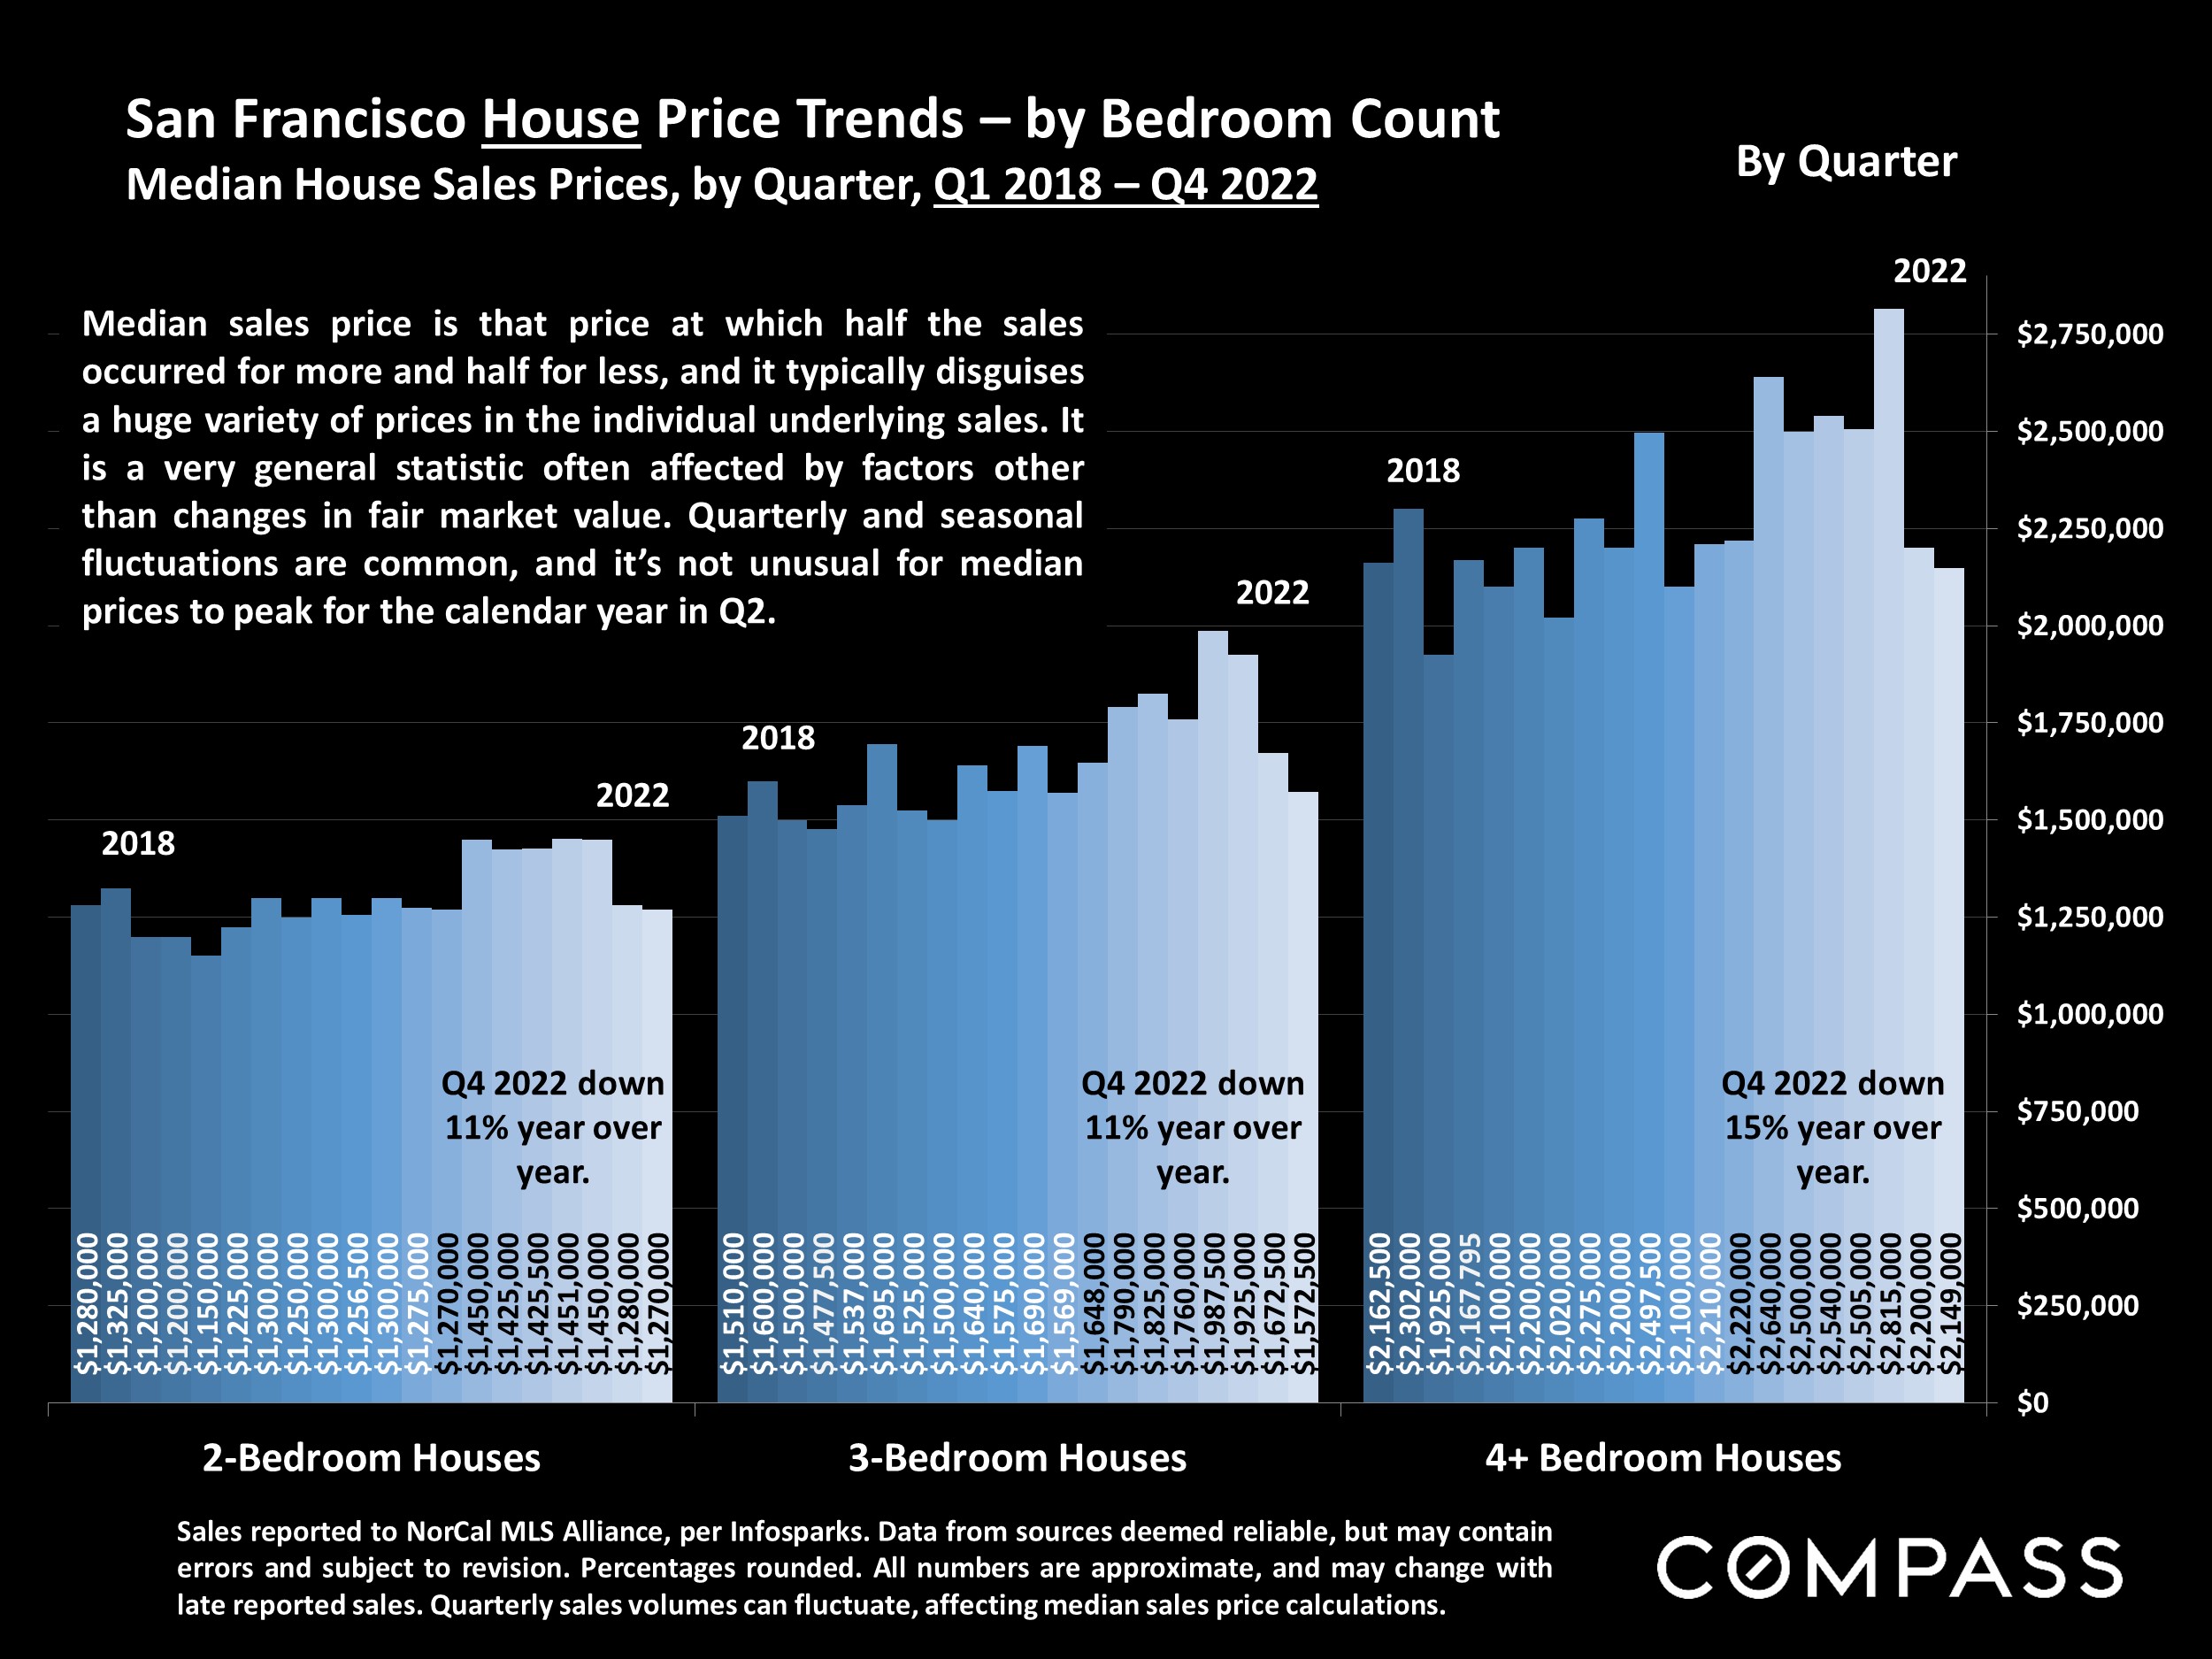 San Francisco House Price Trends - by Bedroom Count